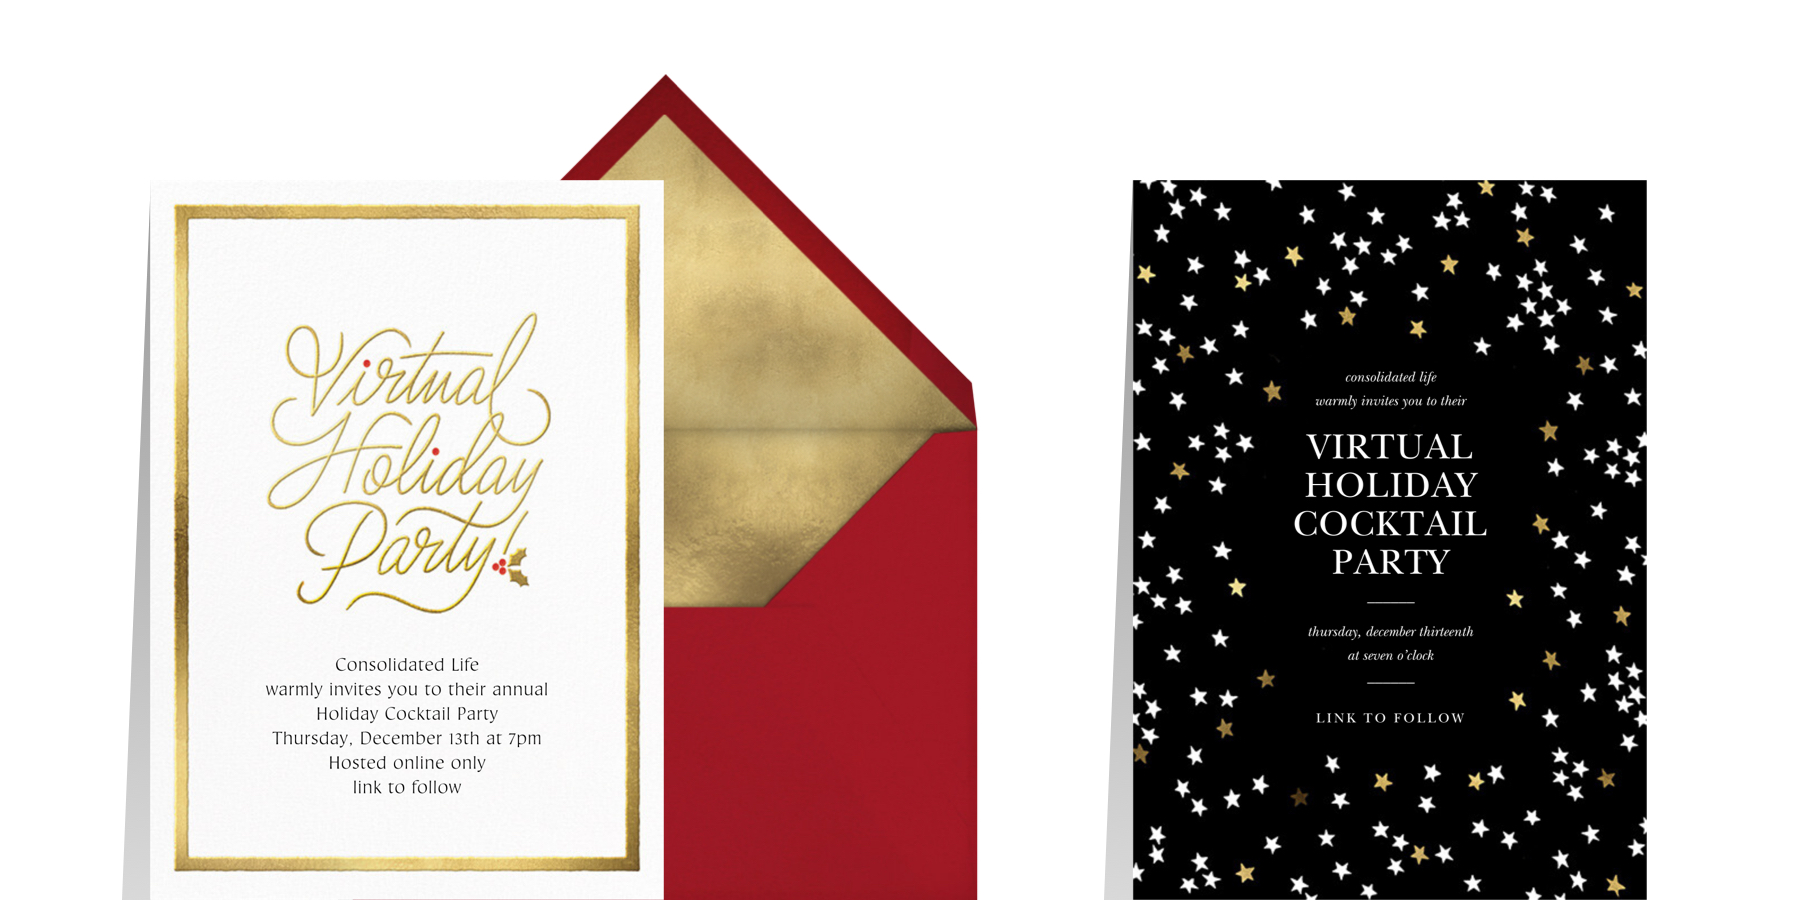 virtual holiday party ideas and invitations from Paperless Post